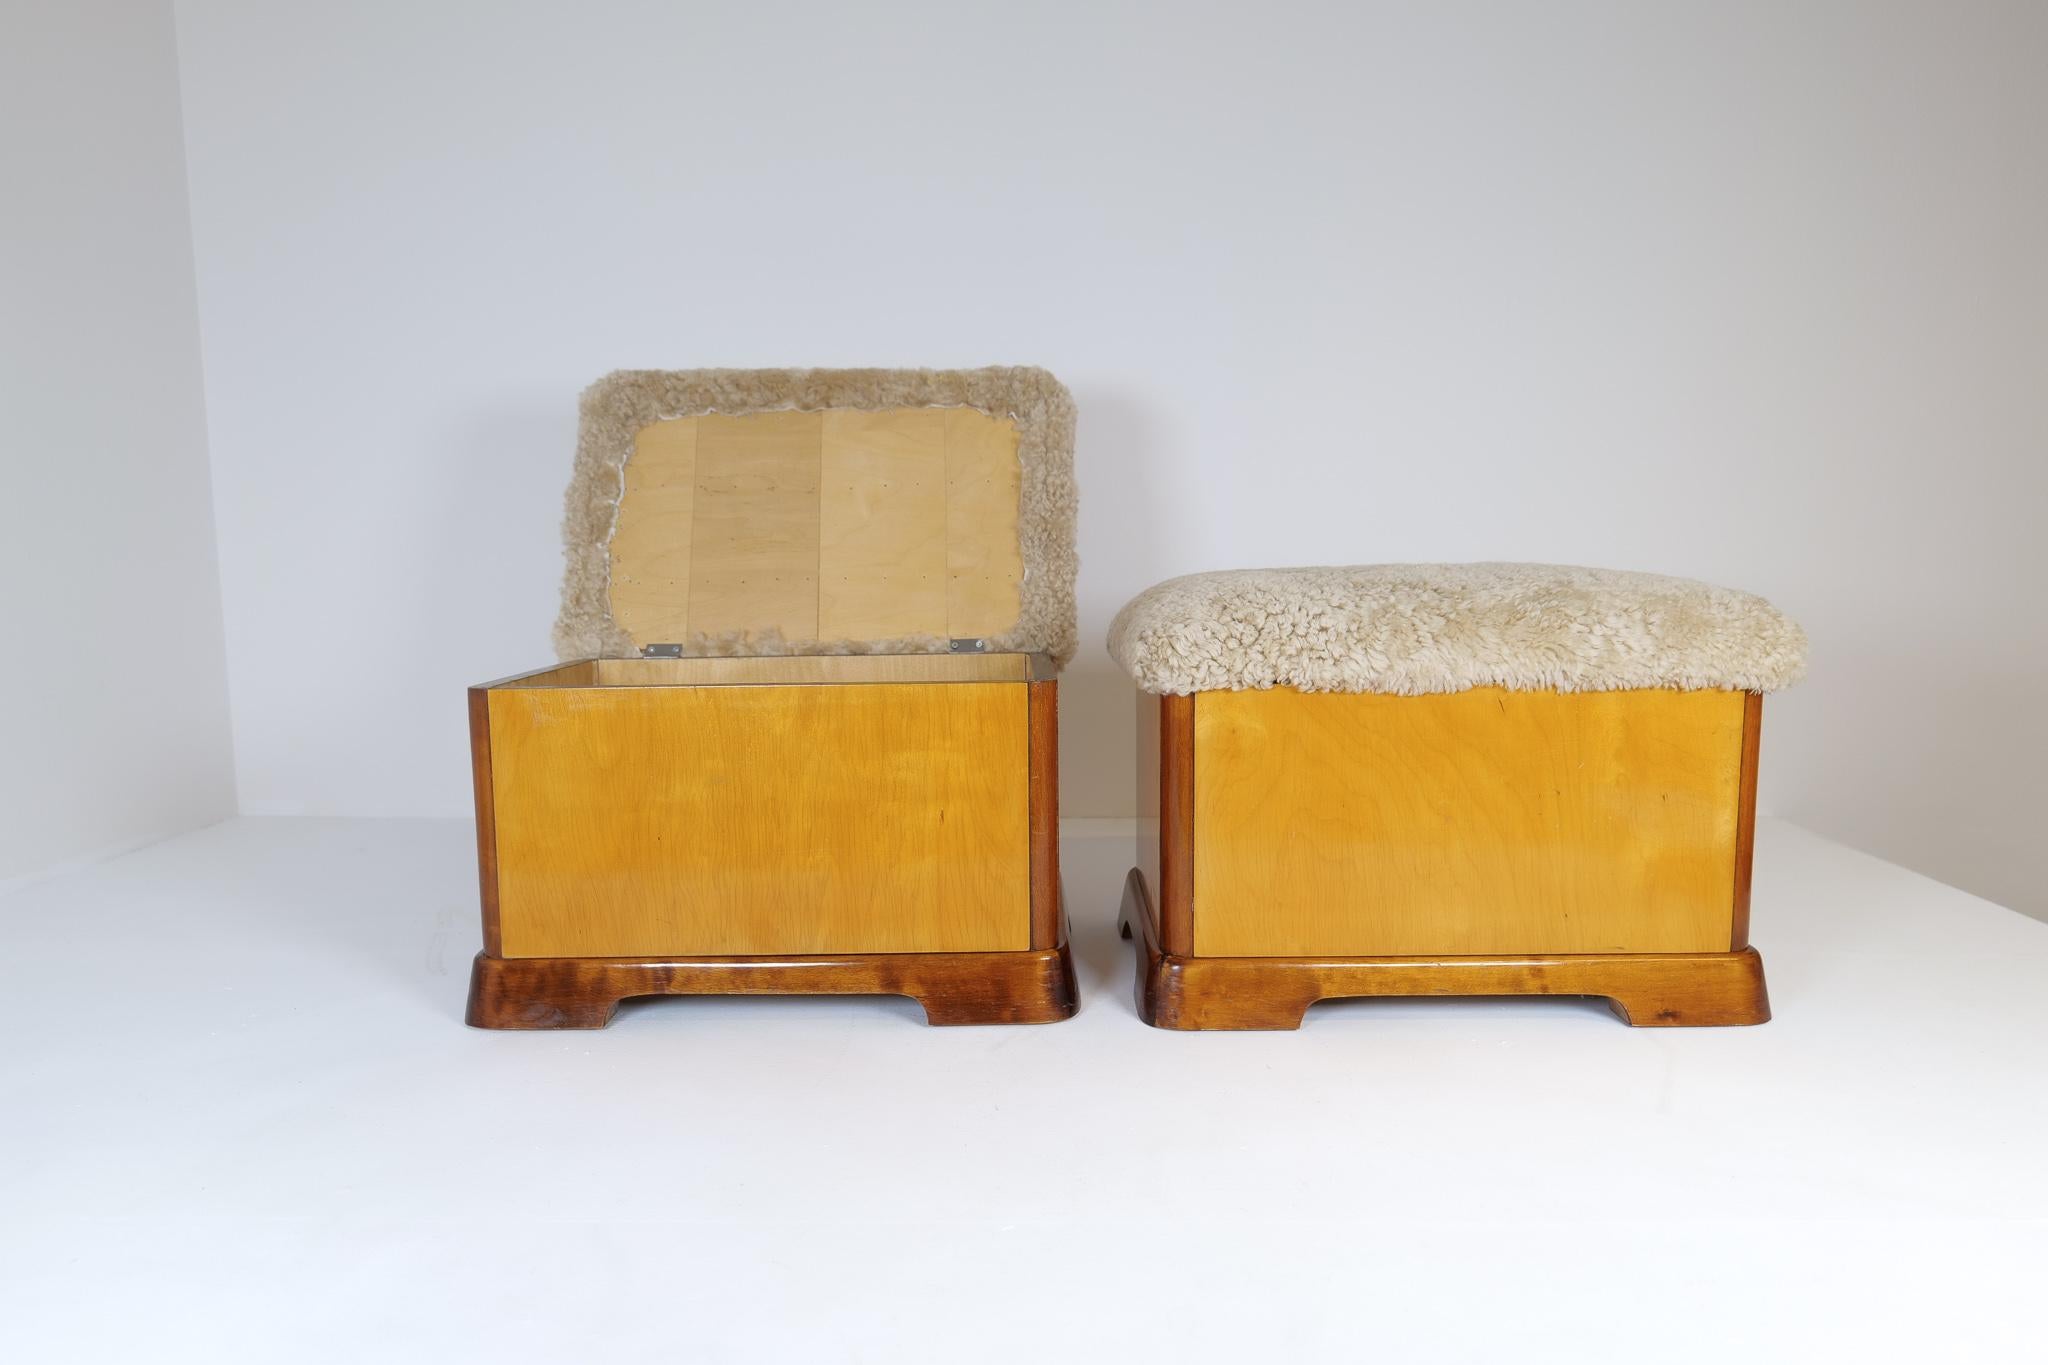 Swedish Art Deco Stools in Lacquered Birch and Sheepskin/Shearling Seat 1940s For Sale 4